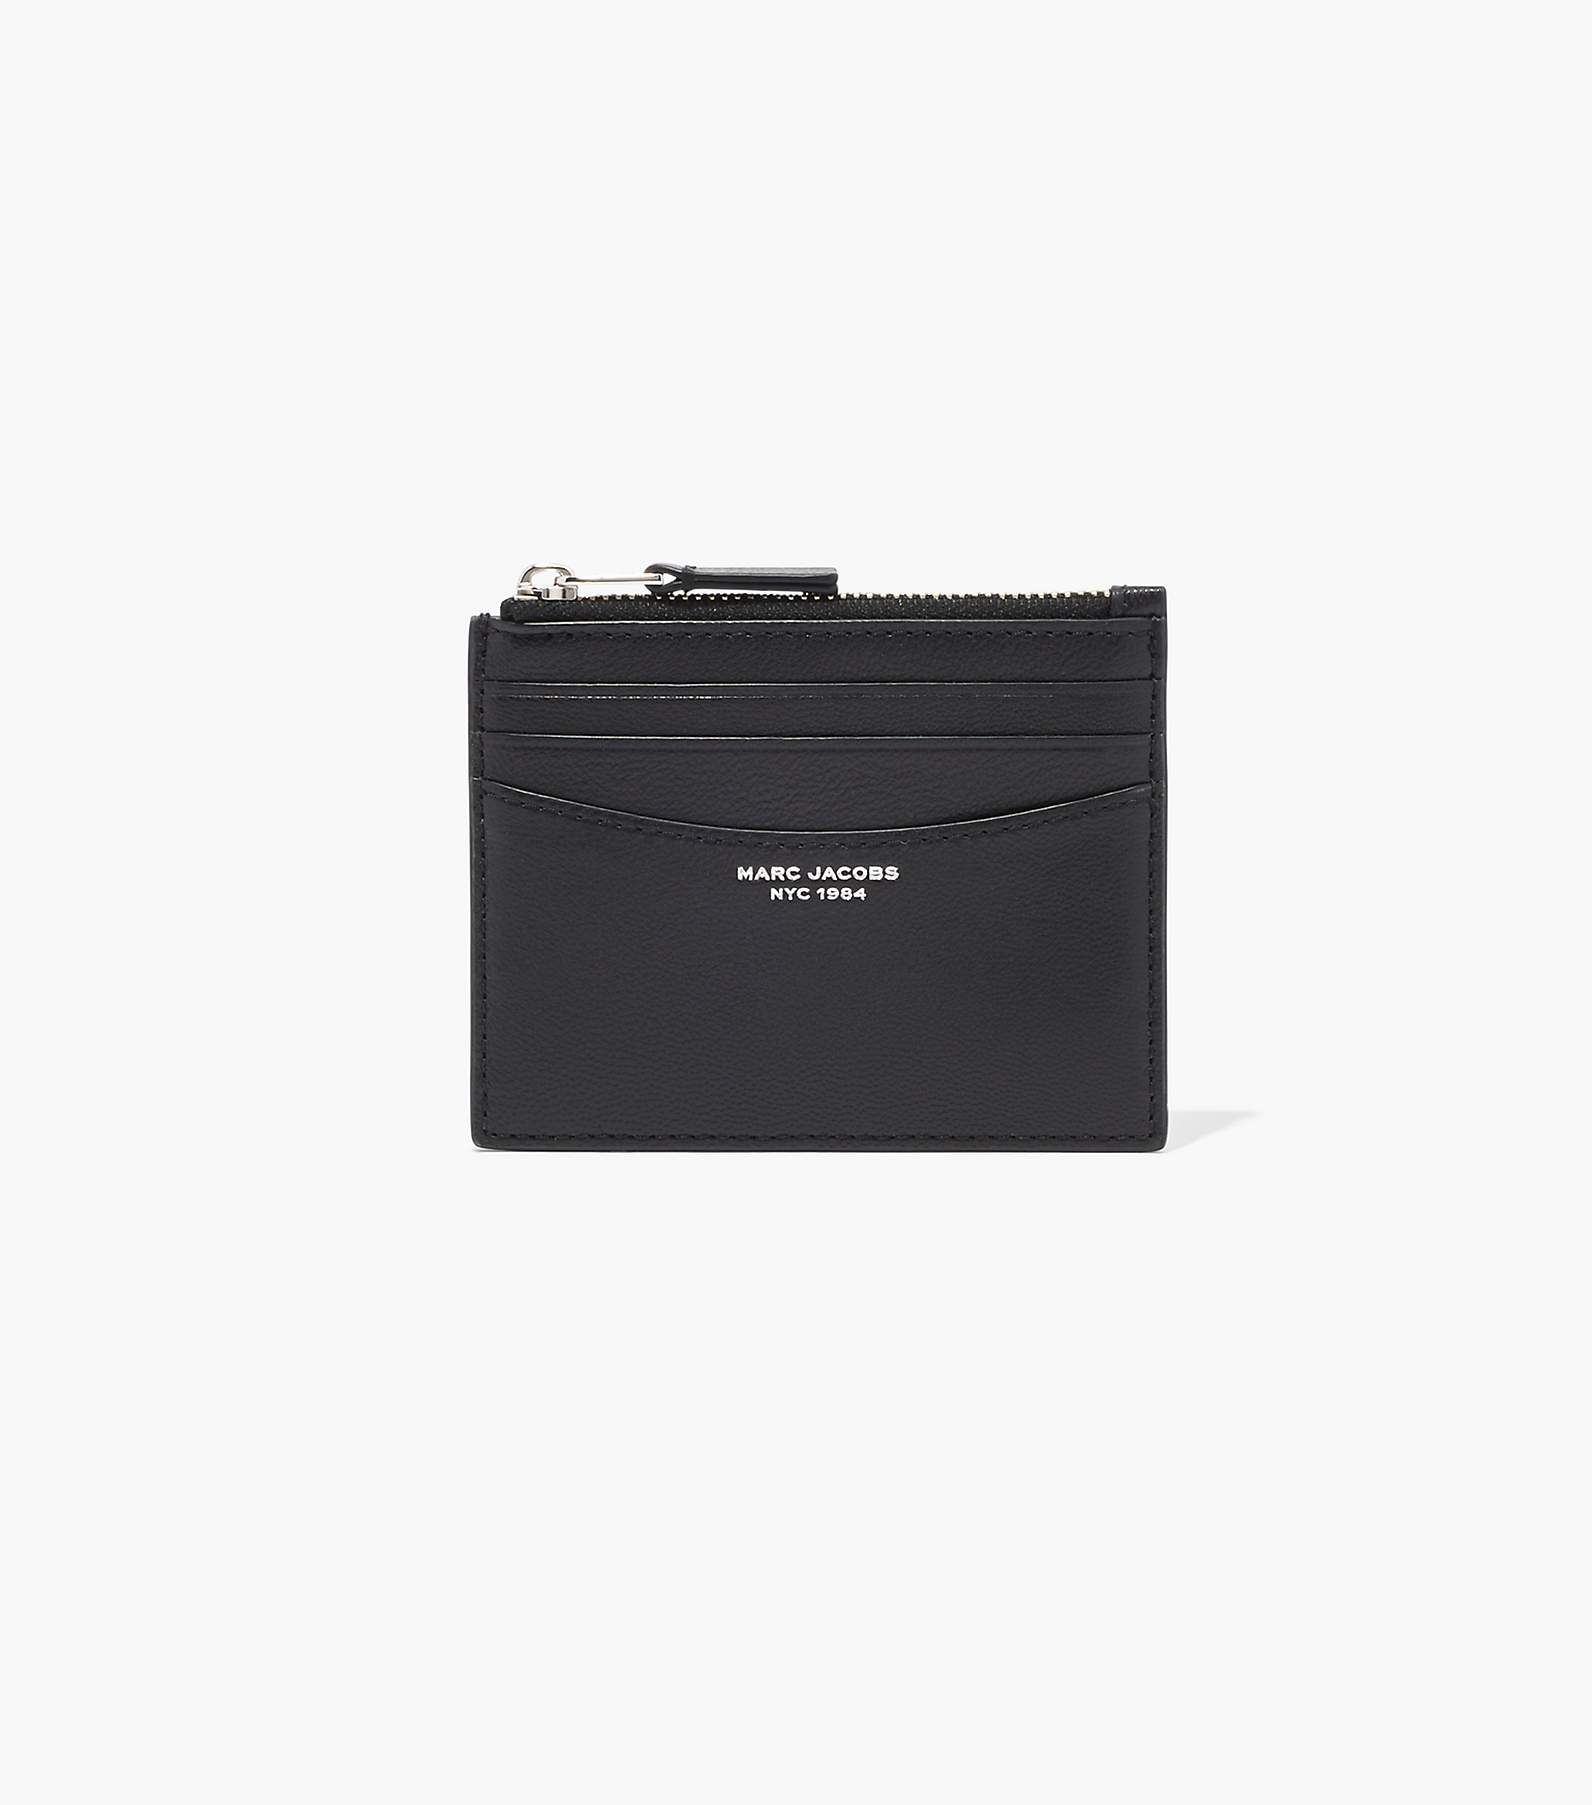 Authentic Marc By Marc Jacobs Leather Card Holder  Card holder leather, Marc  jacobs leather, Leather